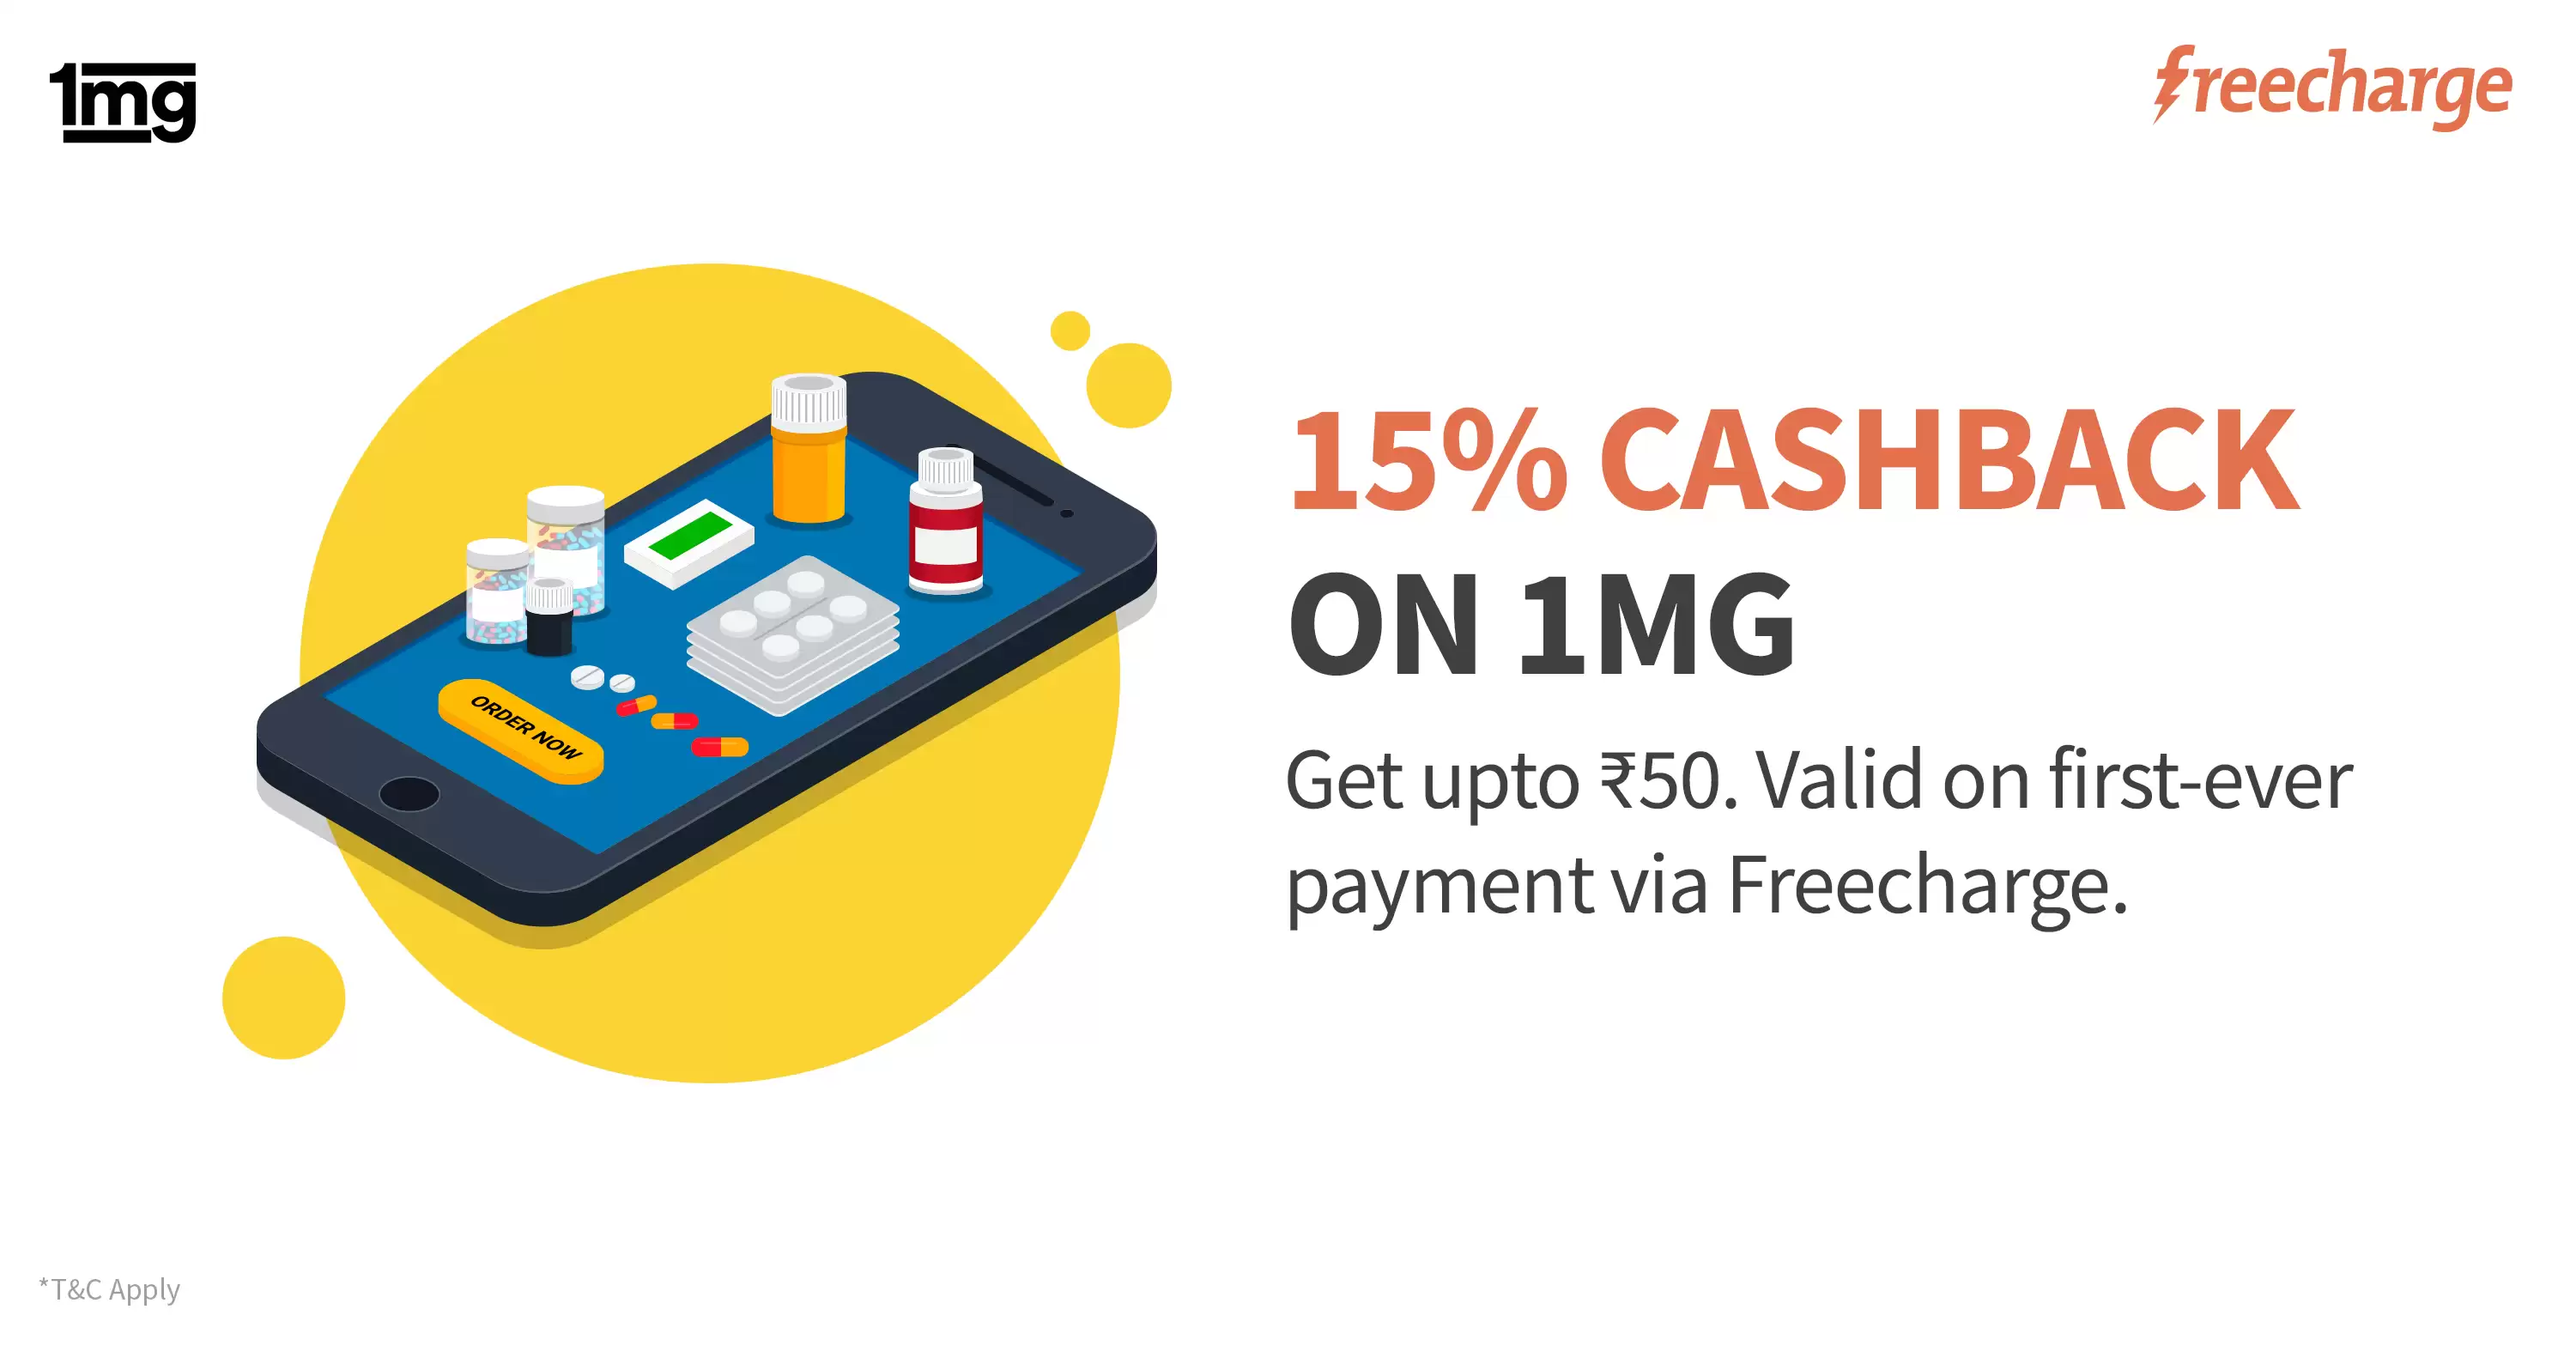 Get 15% Cashback Upto Rs.50 On First Ever Transaction On 1mg Via Freecharge